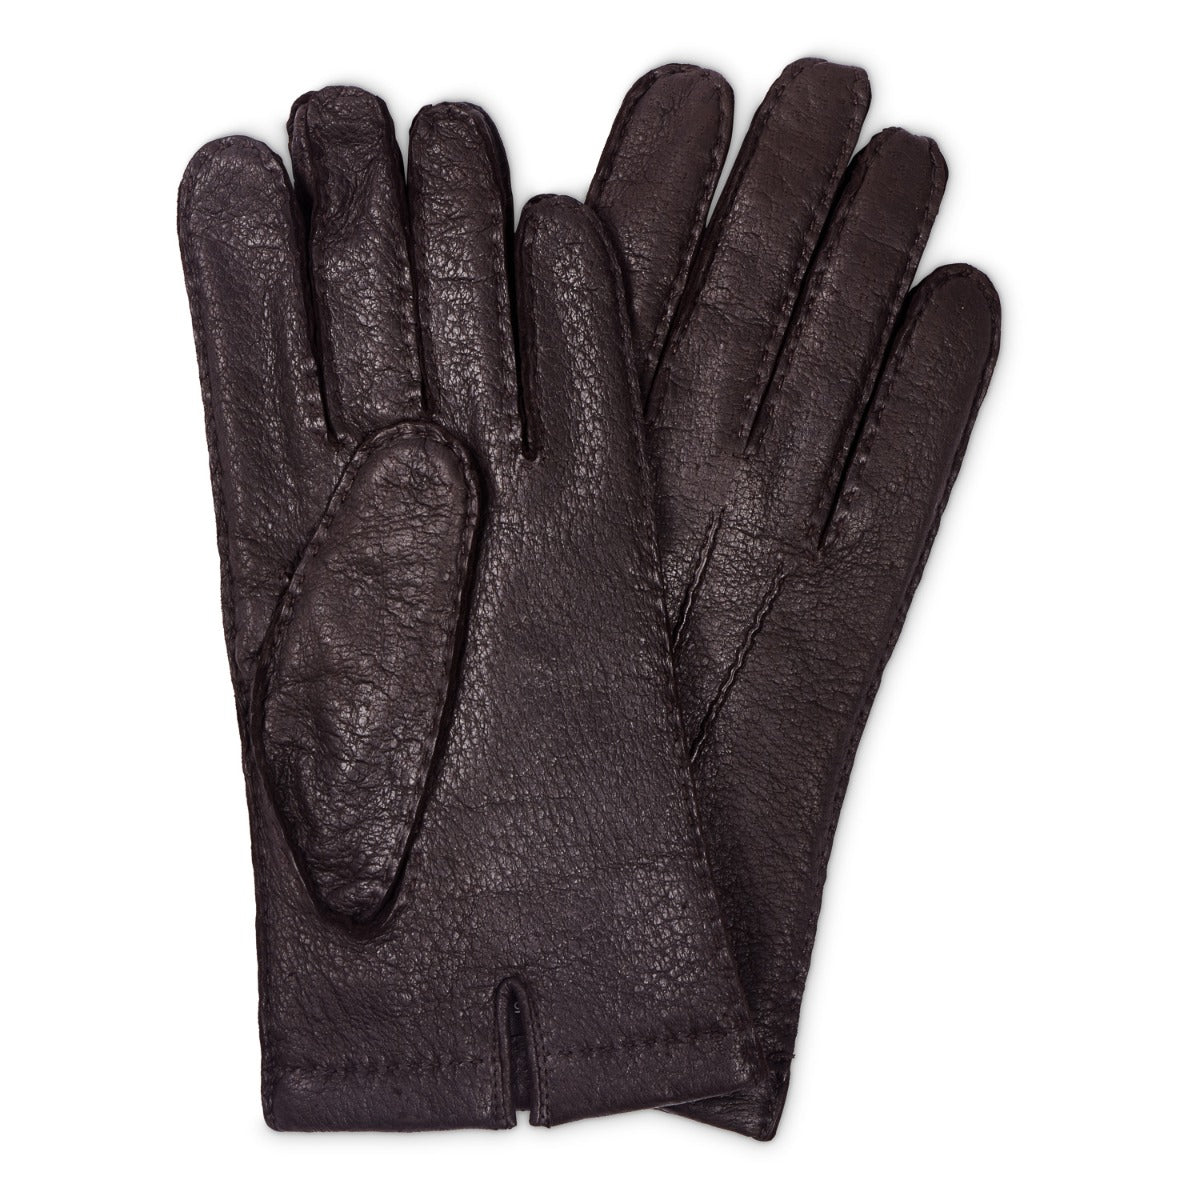 A pair of Sovereign Grade Dark Brown Peccary Leather Gloves, Cashmere Lined by KirbyAllison.com on a white background.